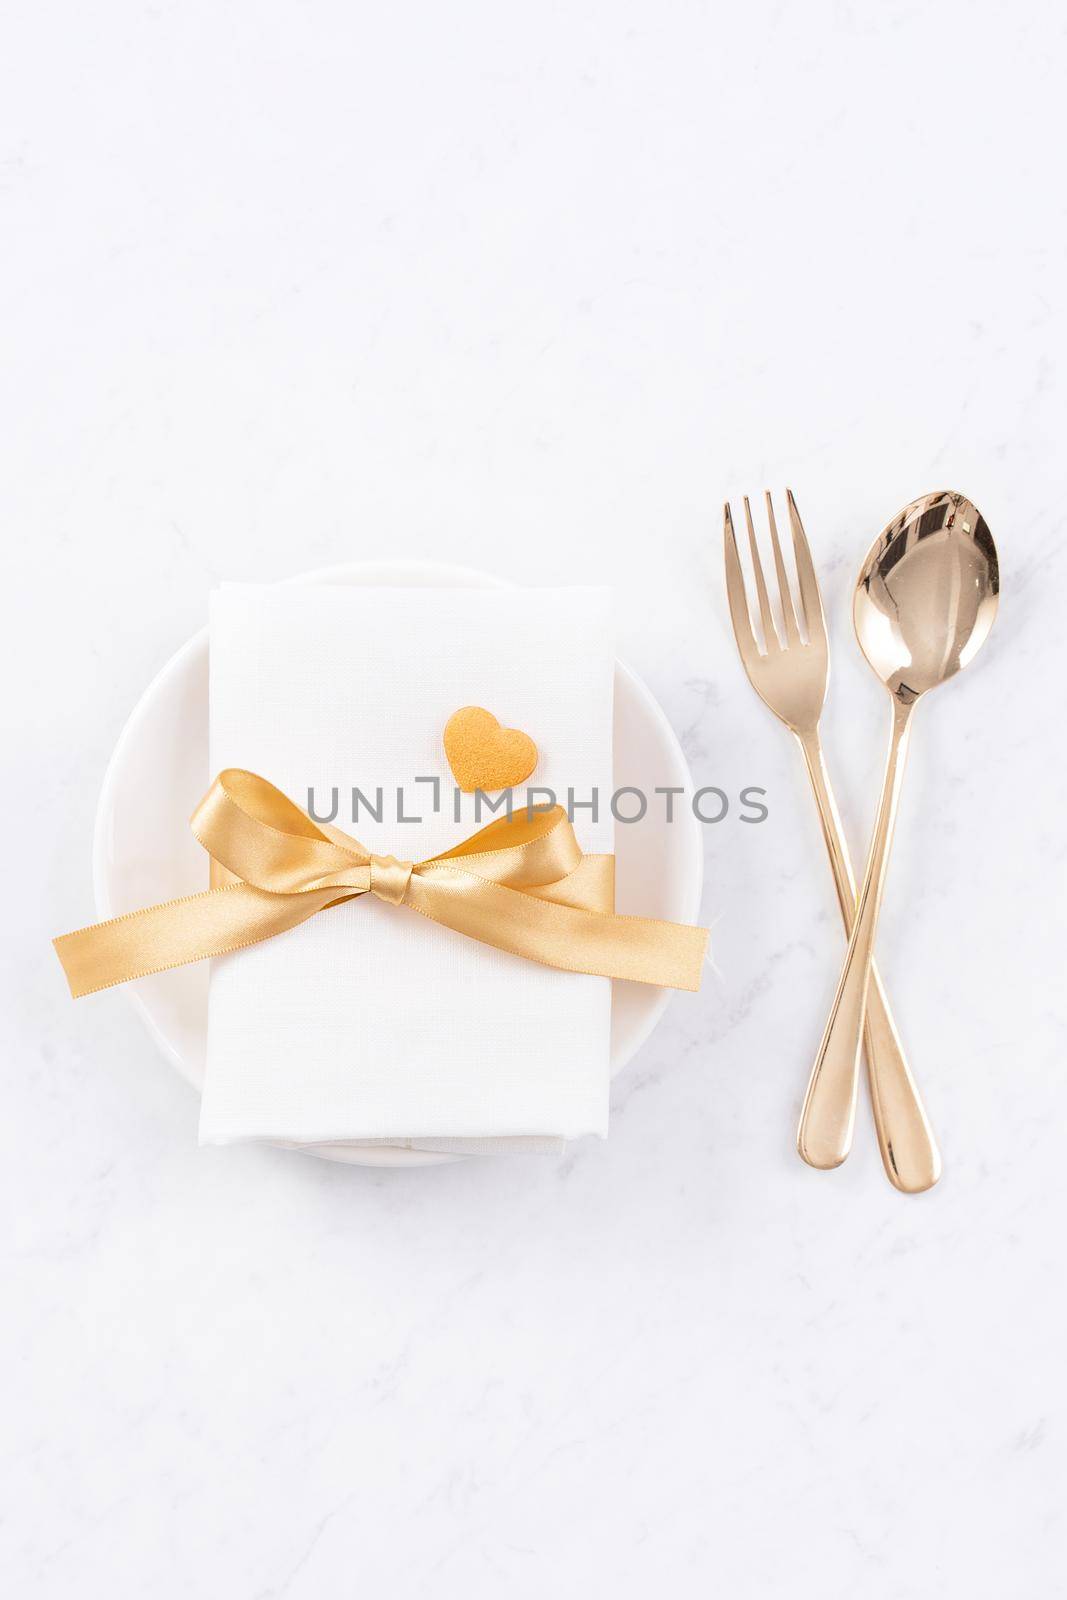 Valentine's Day, Mother's Day, holiday dating meal, banquet design concept - White plate and golden ribbon on marble background, top view, flat lay.